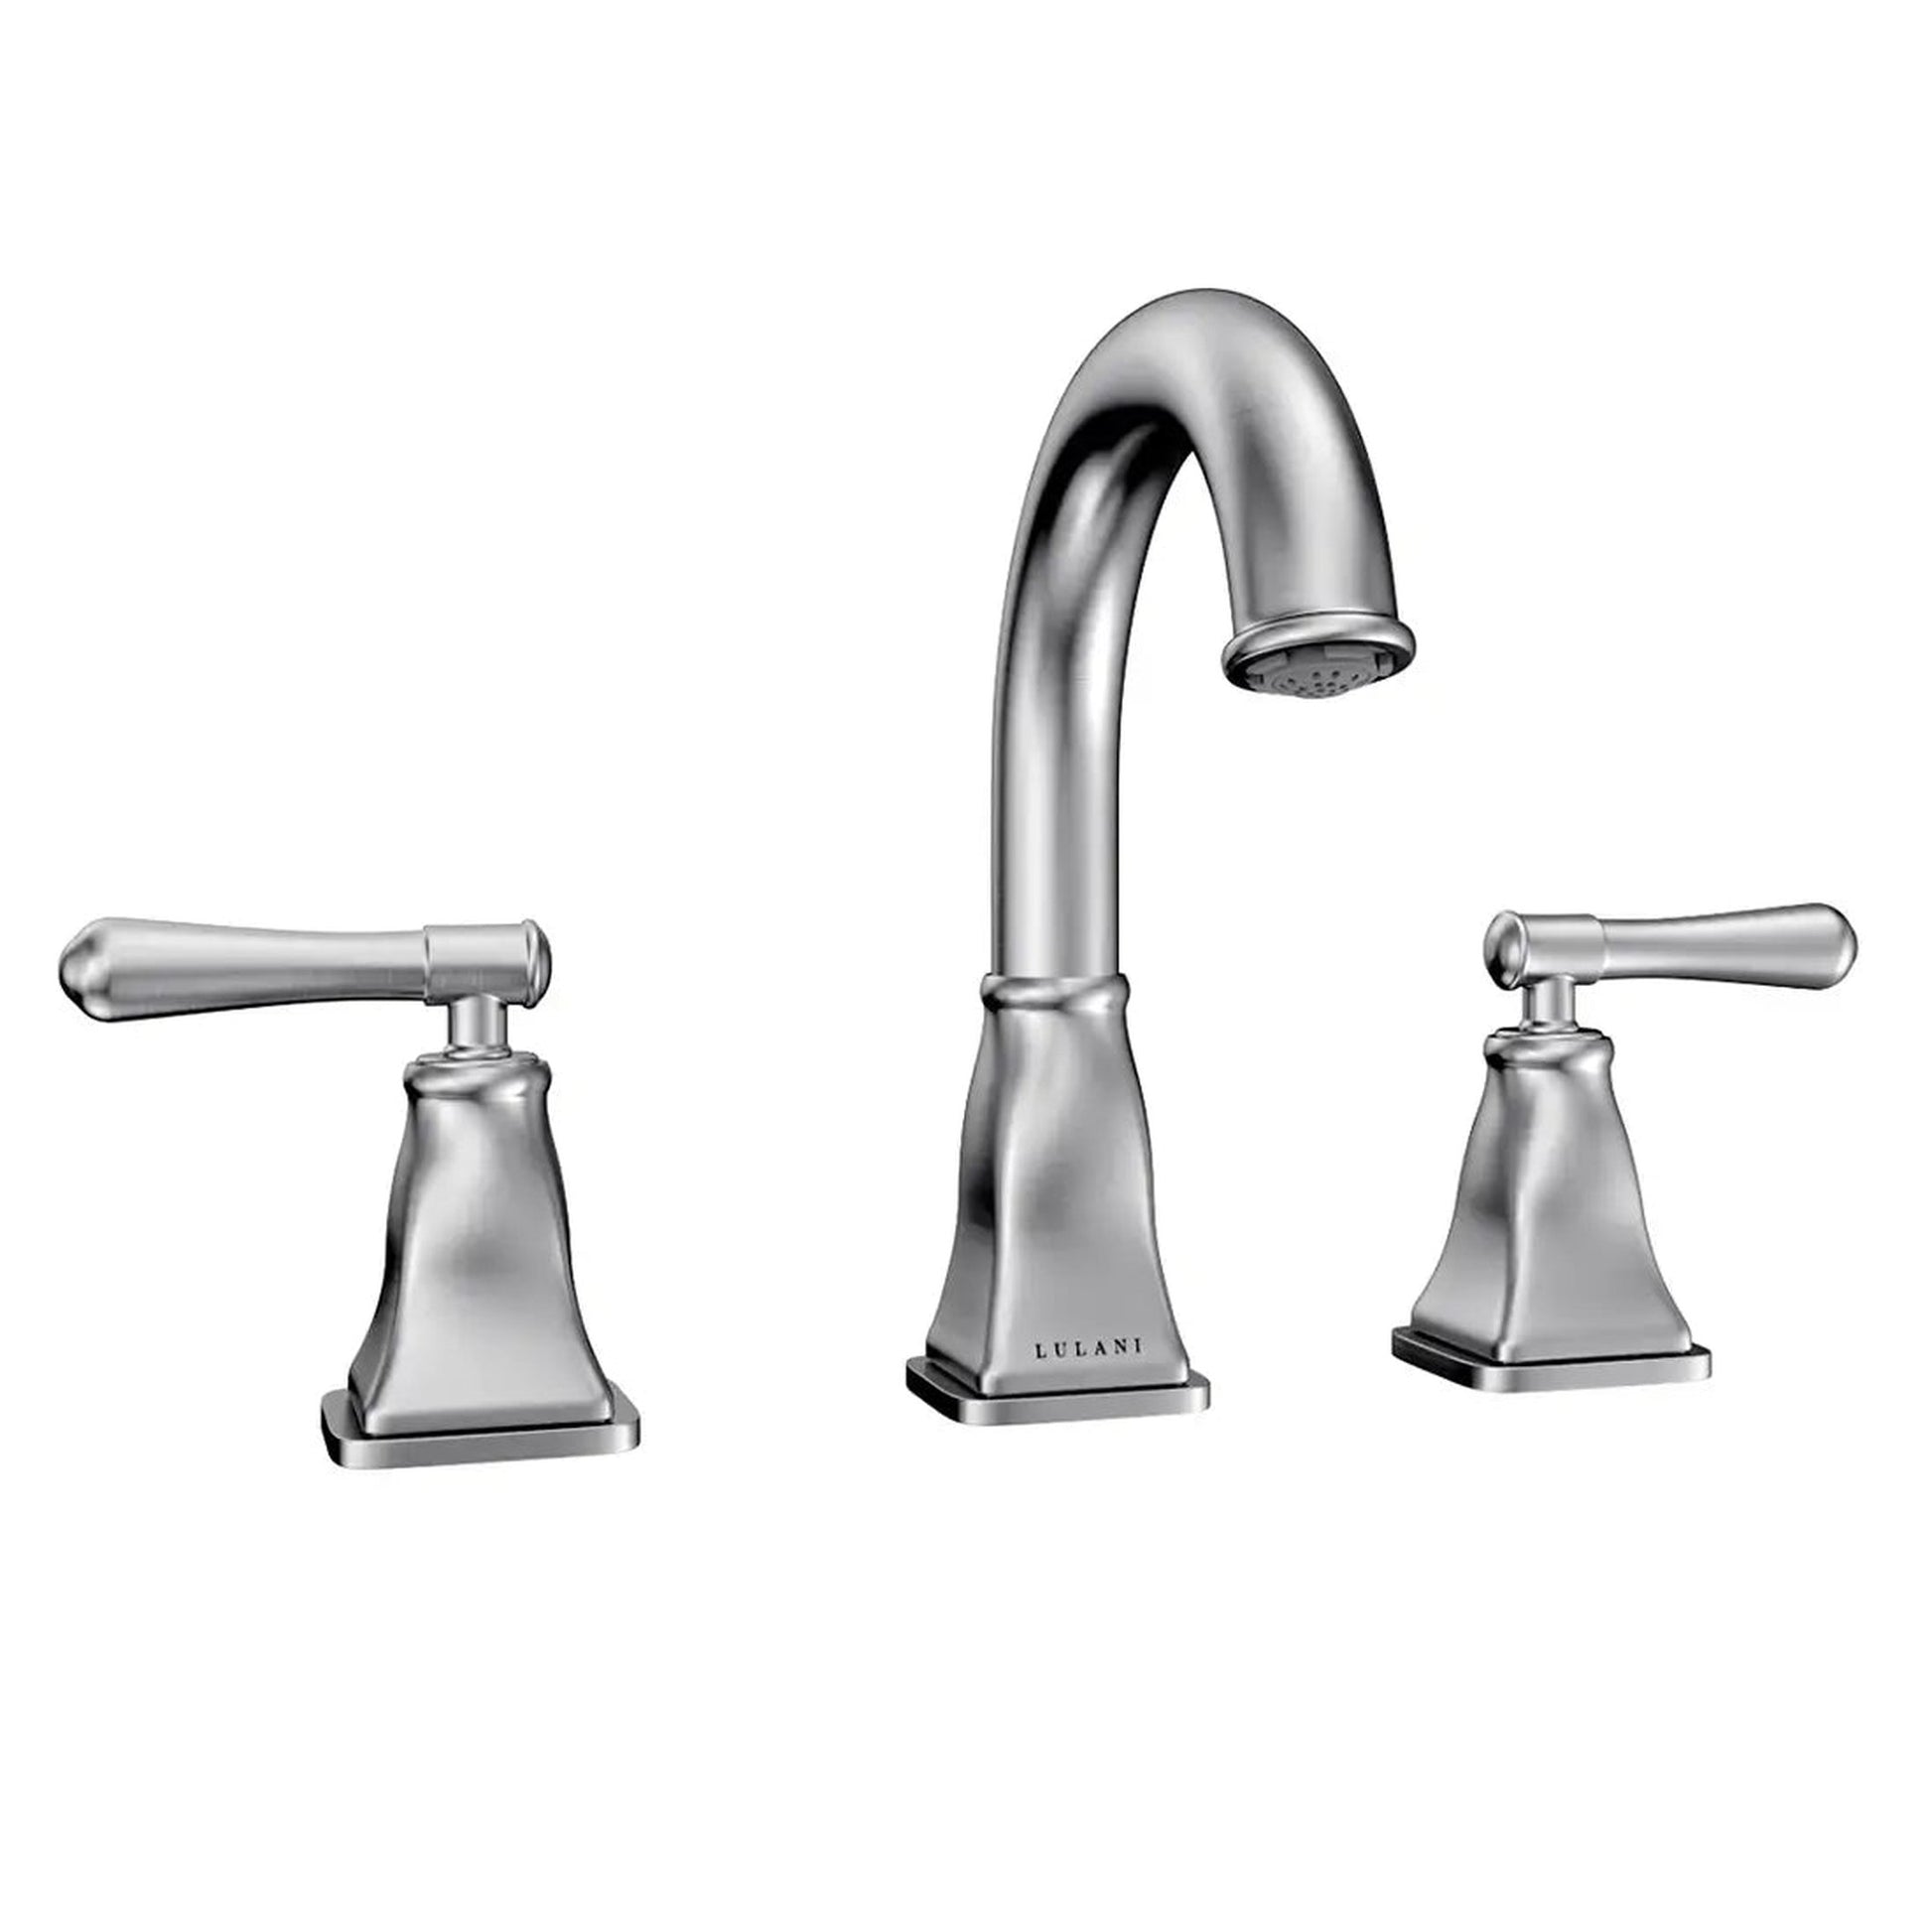 Lulani Aurora Brushed Nickel 1.2 GPM Double Handle Widespread Brass Faucet With Drain Assembly